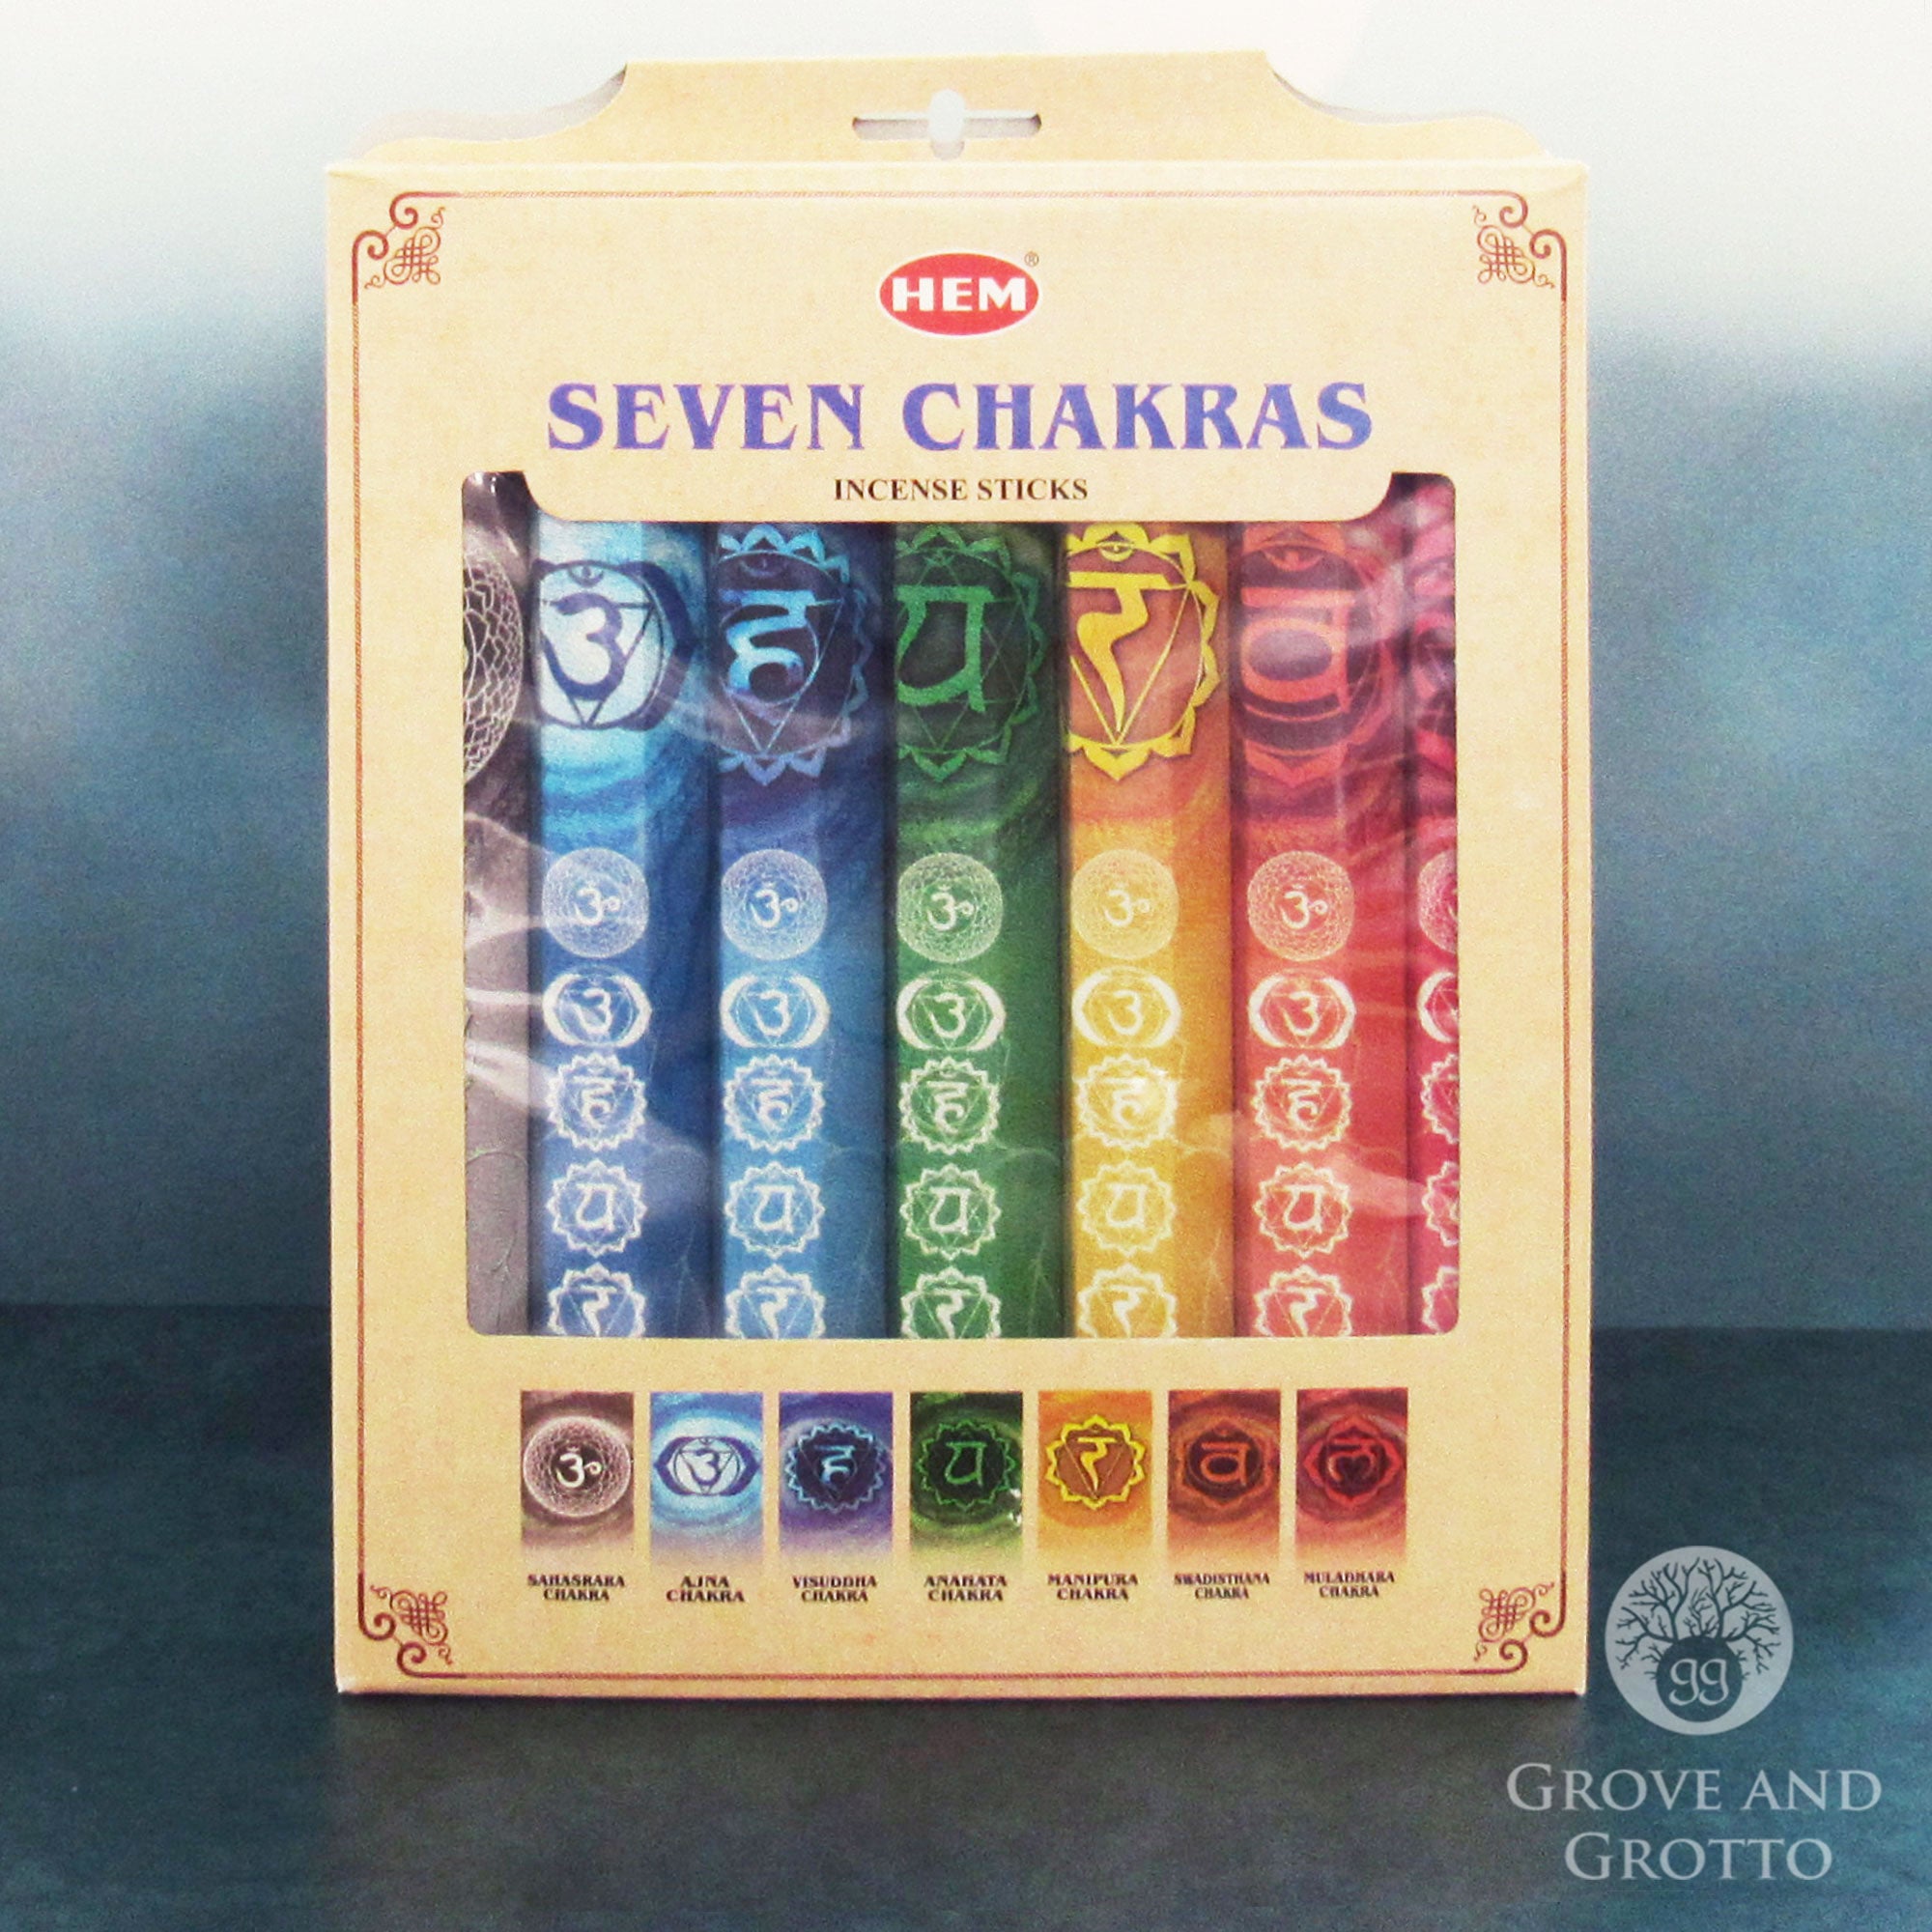 Indica Tientallen laag Seven Chakras Incense - Deluxe Boxed Gift Set by HEM – Grove and Grotto